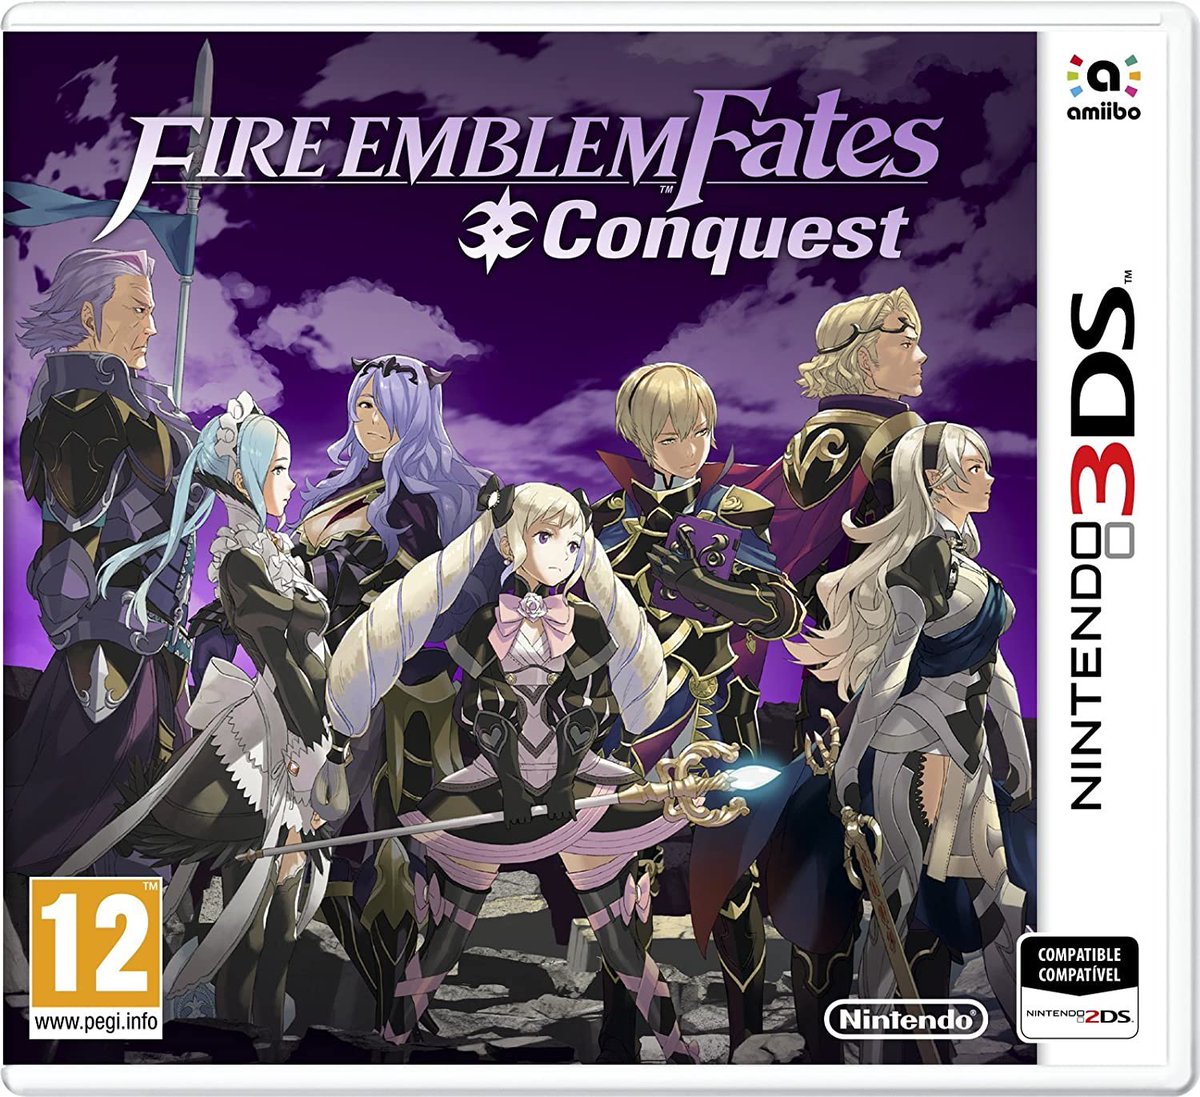 The 4 favorite 3DS games thing.

add a extra with FE awakening and echoes 